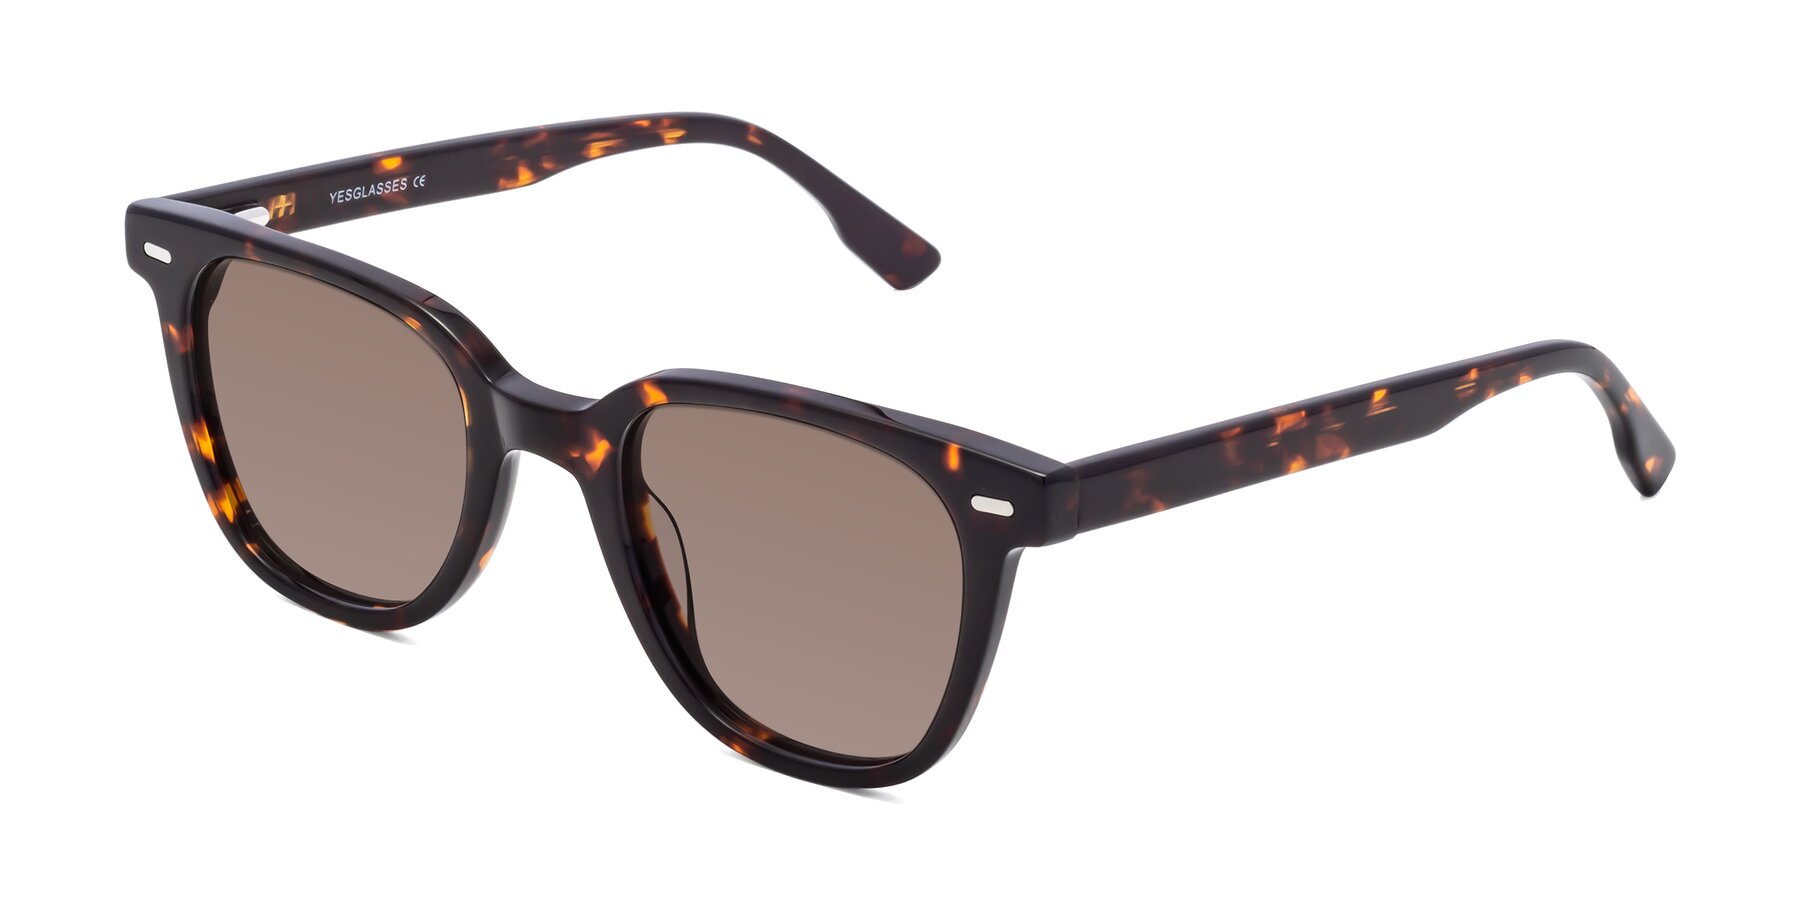 Angle of Beacon in Tortoise with Medium Brown Tinted Lenses